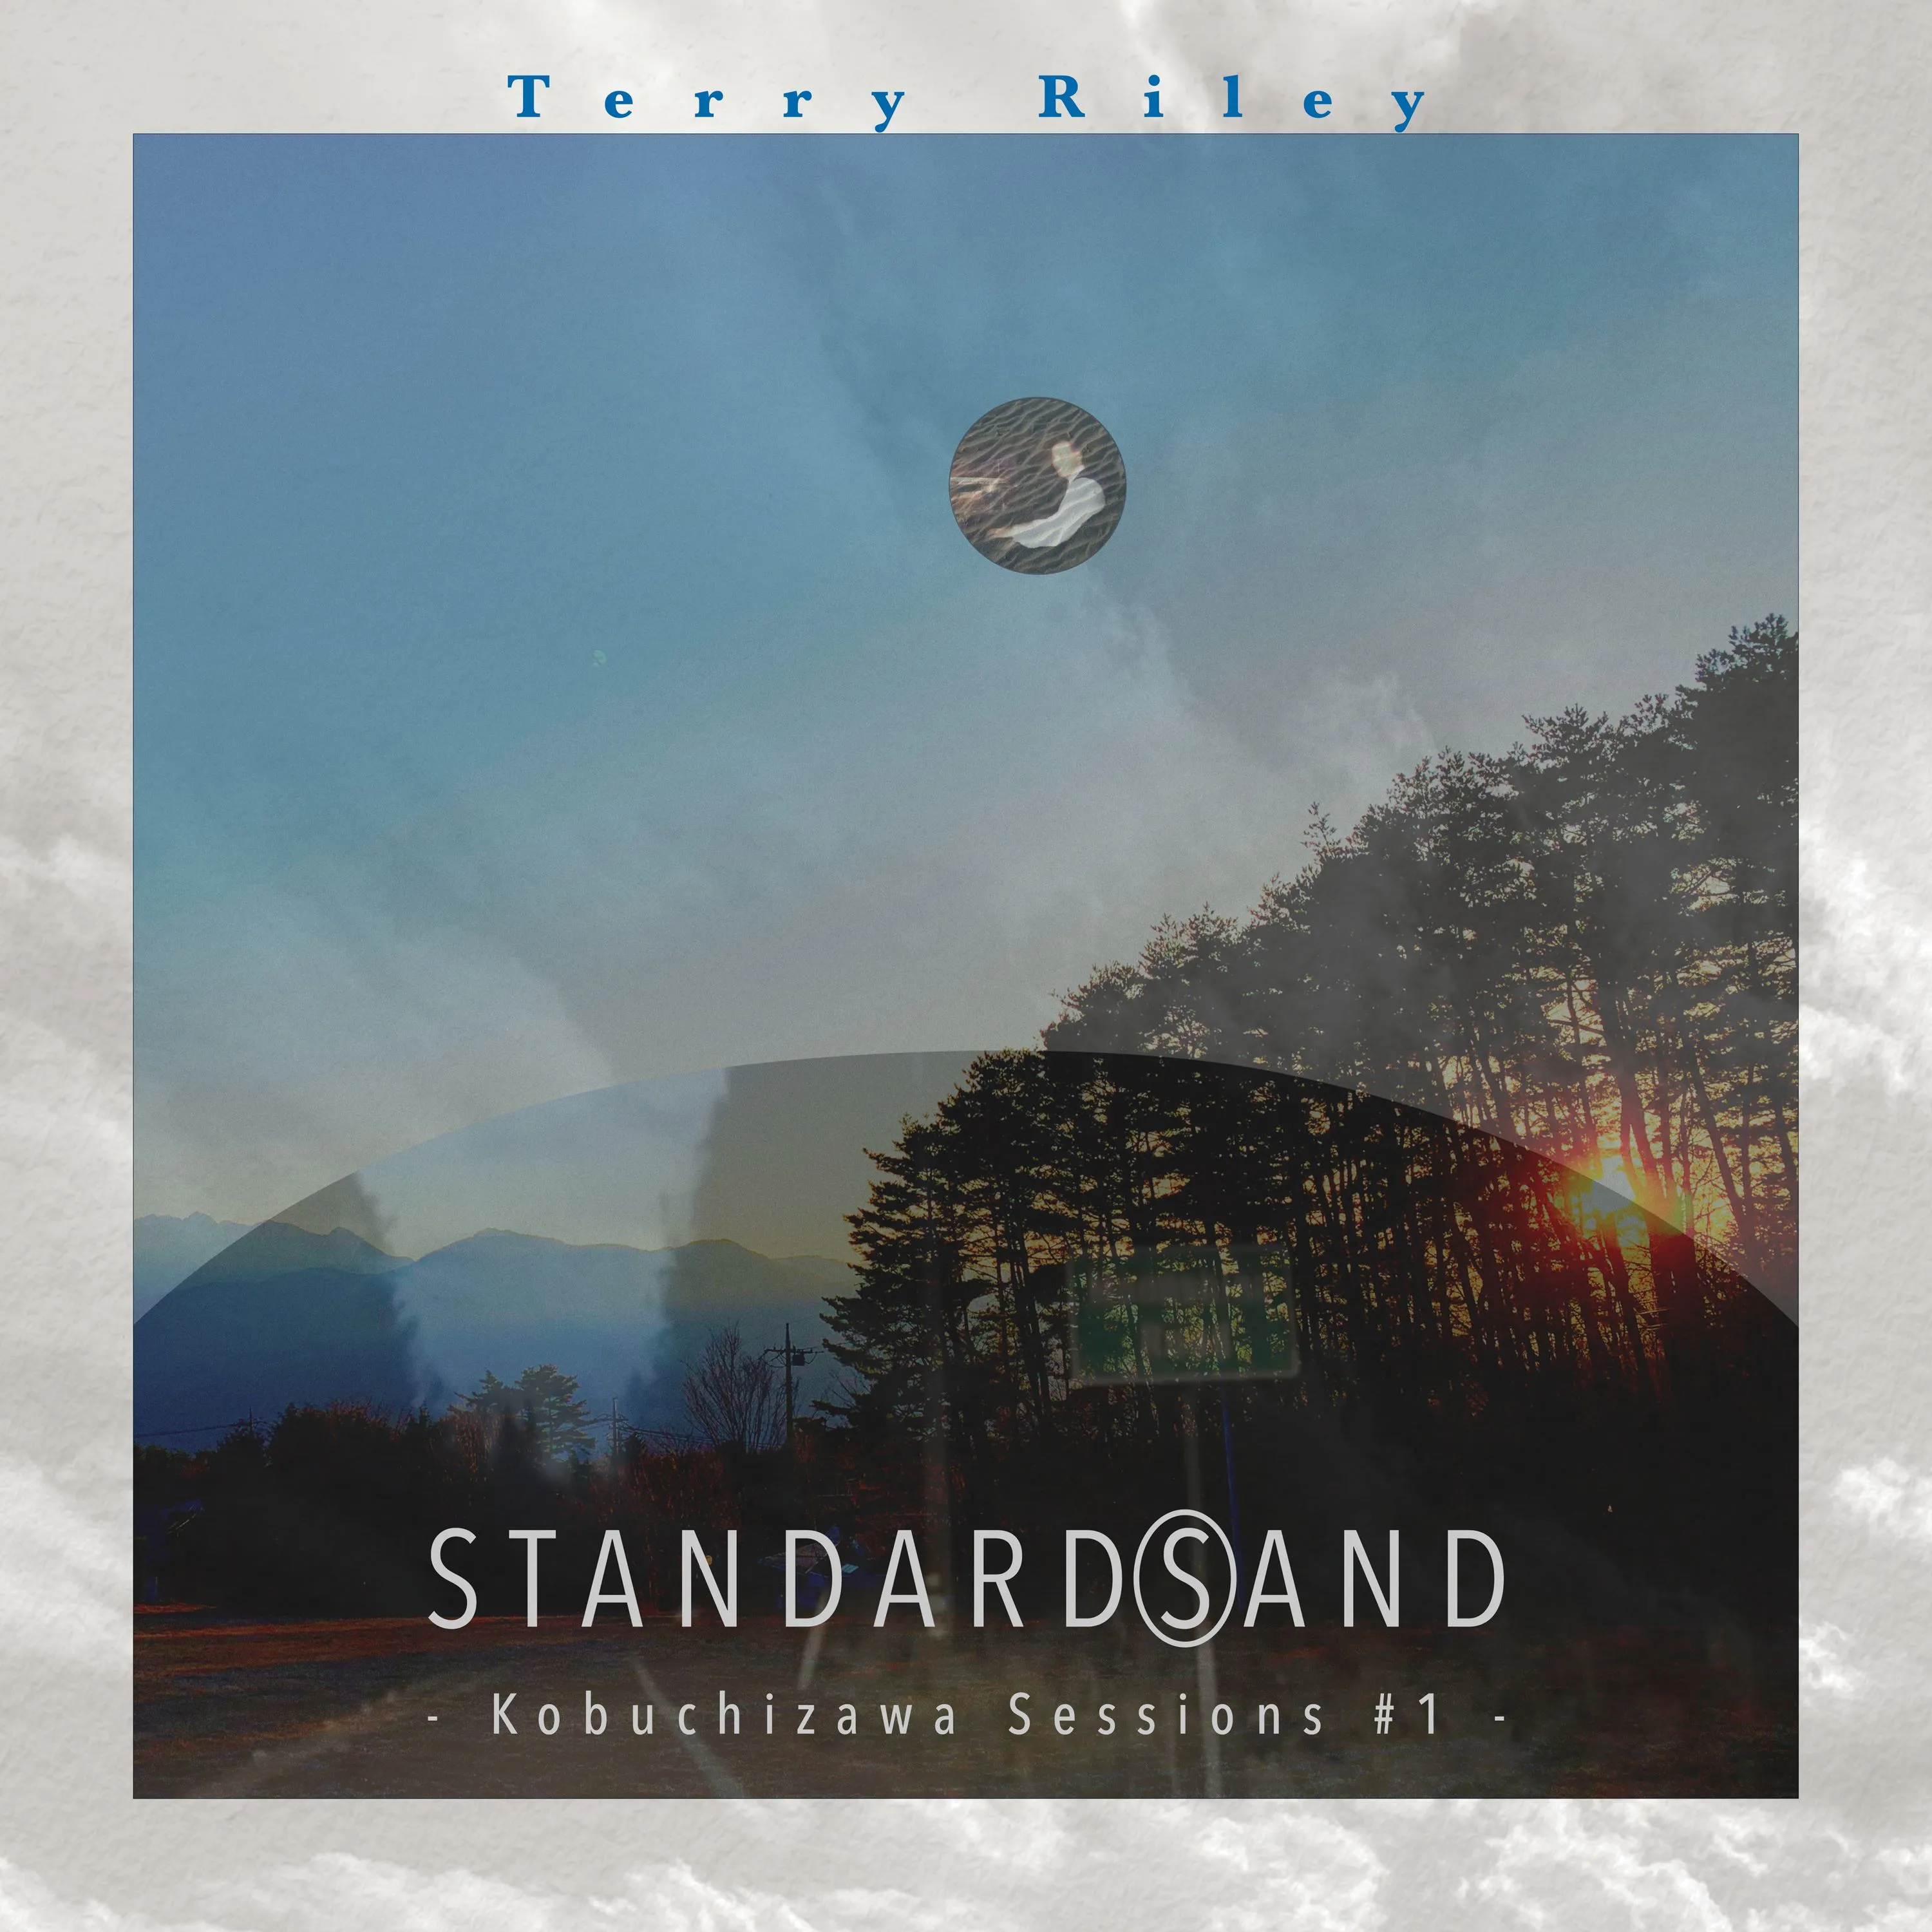 RECORD STORE DAY 2021.6.12 TERRY RILEY / TERRY RILEY STANDARD(S)AND - KOBUCHIZAWA SESSIOND #1